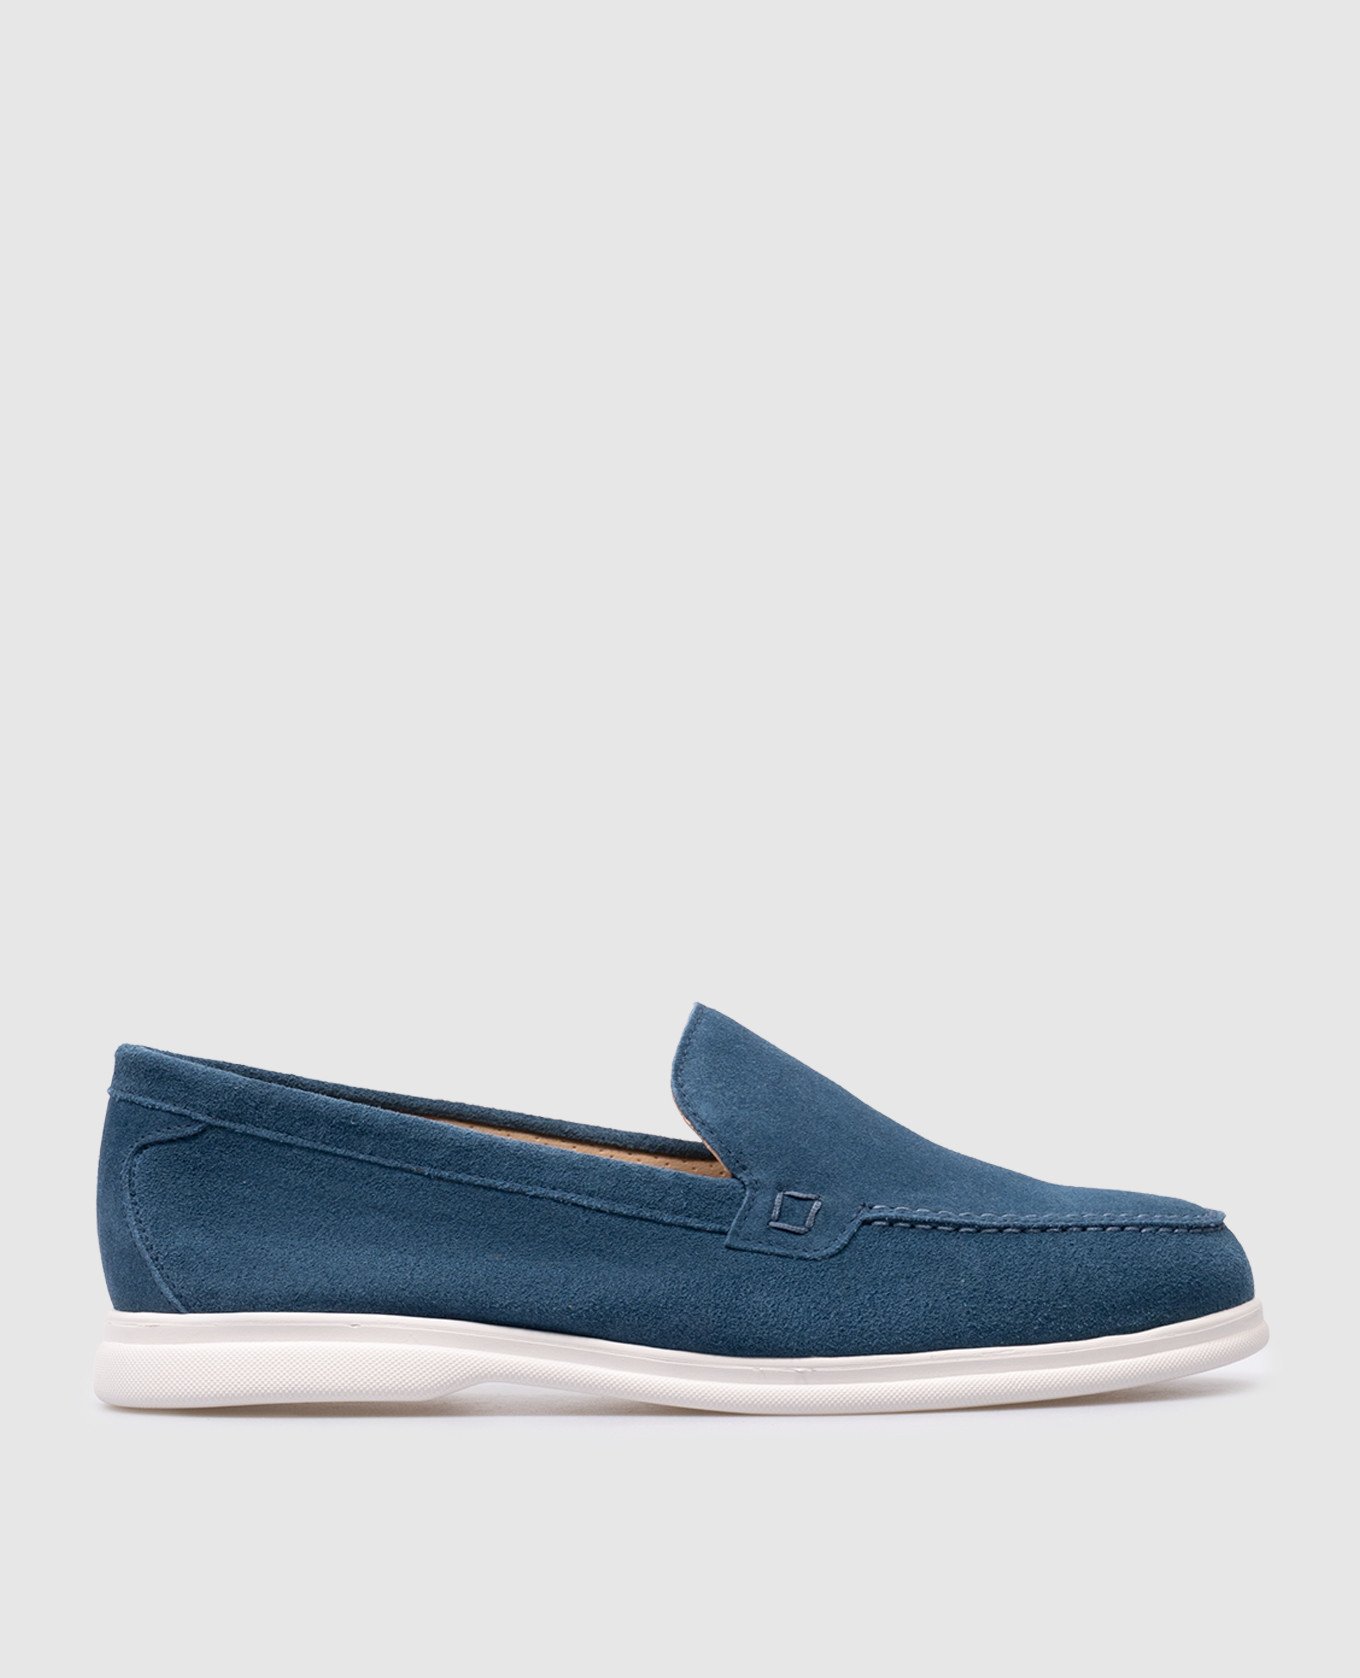 Suede blue loafers